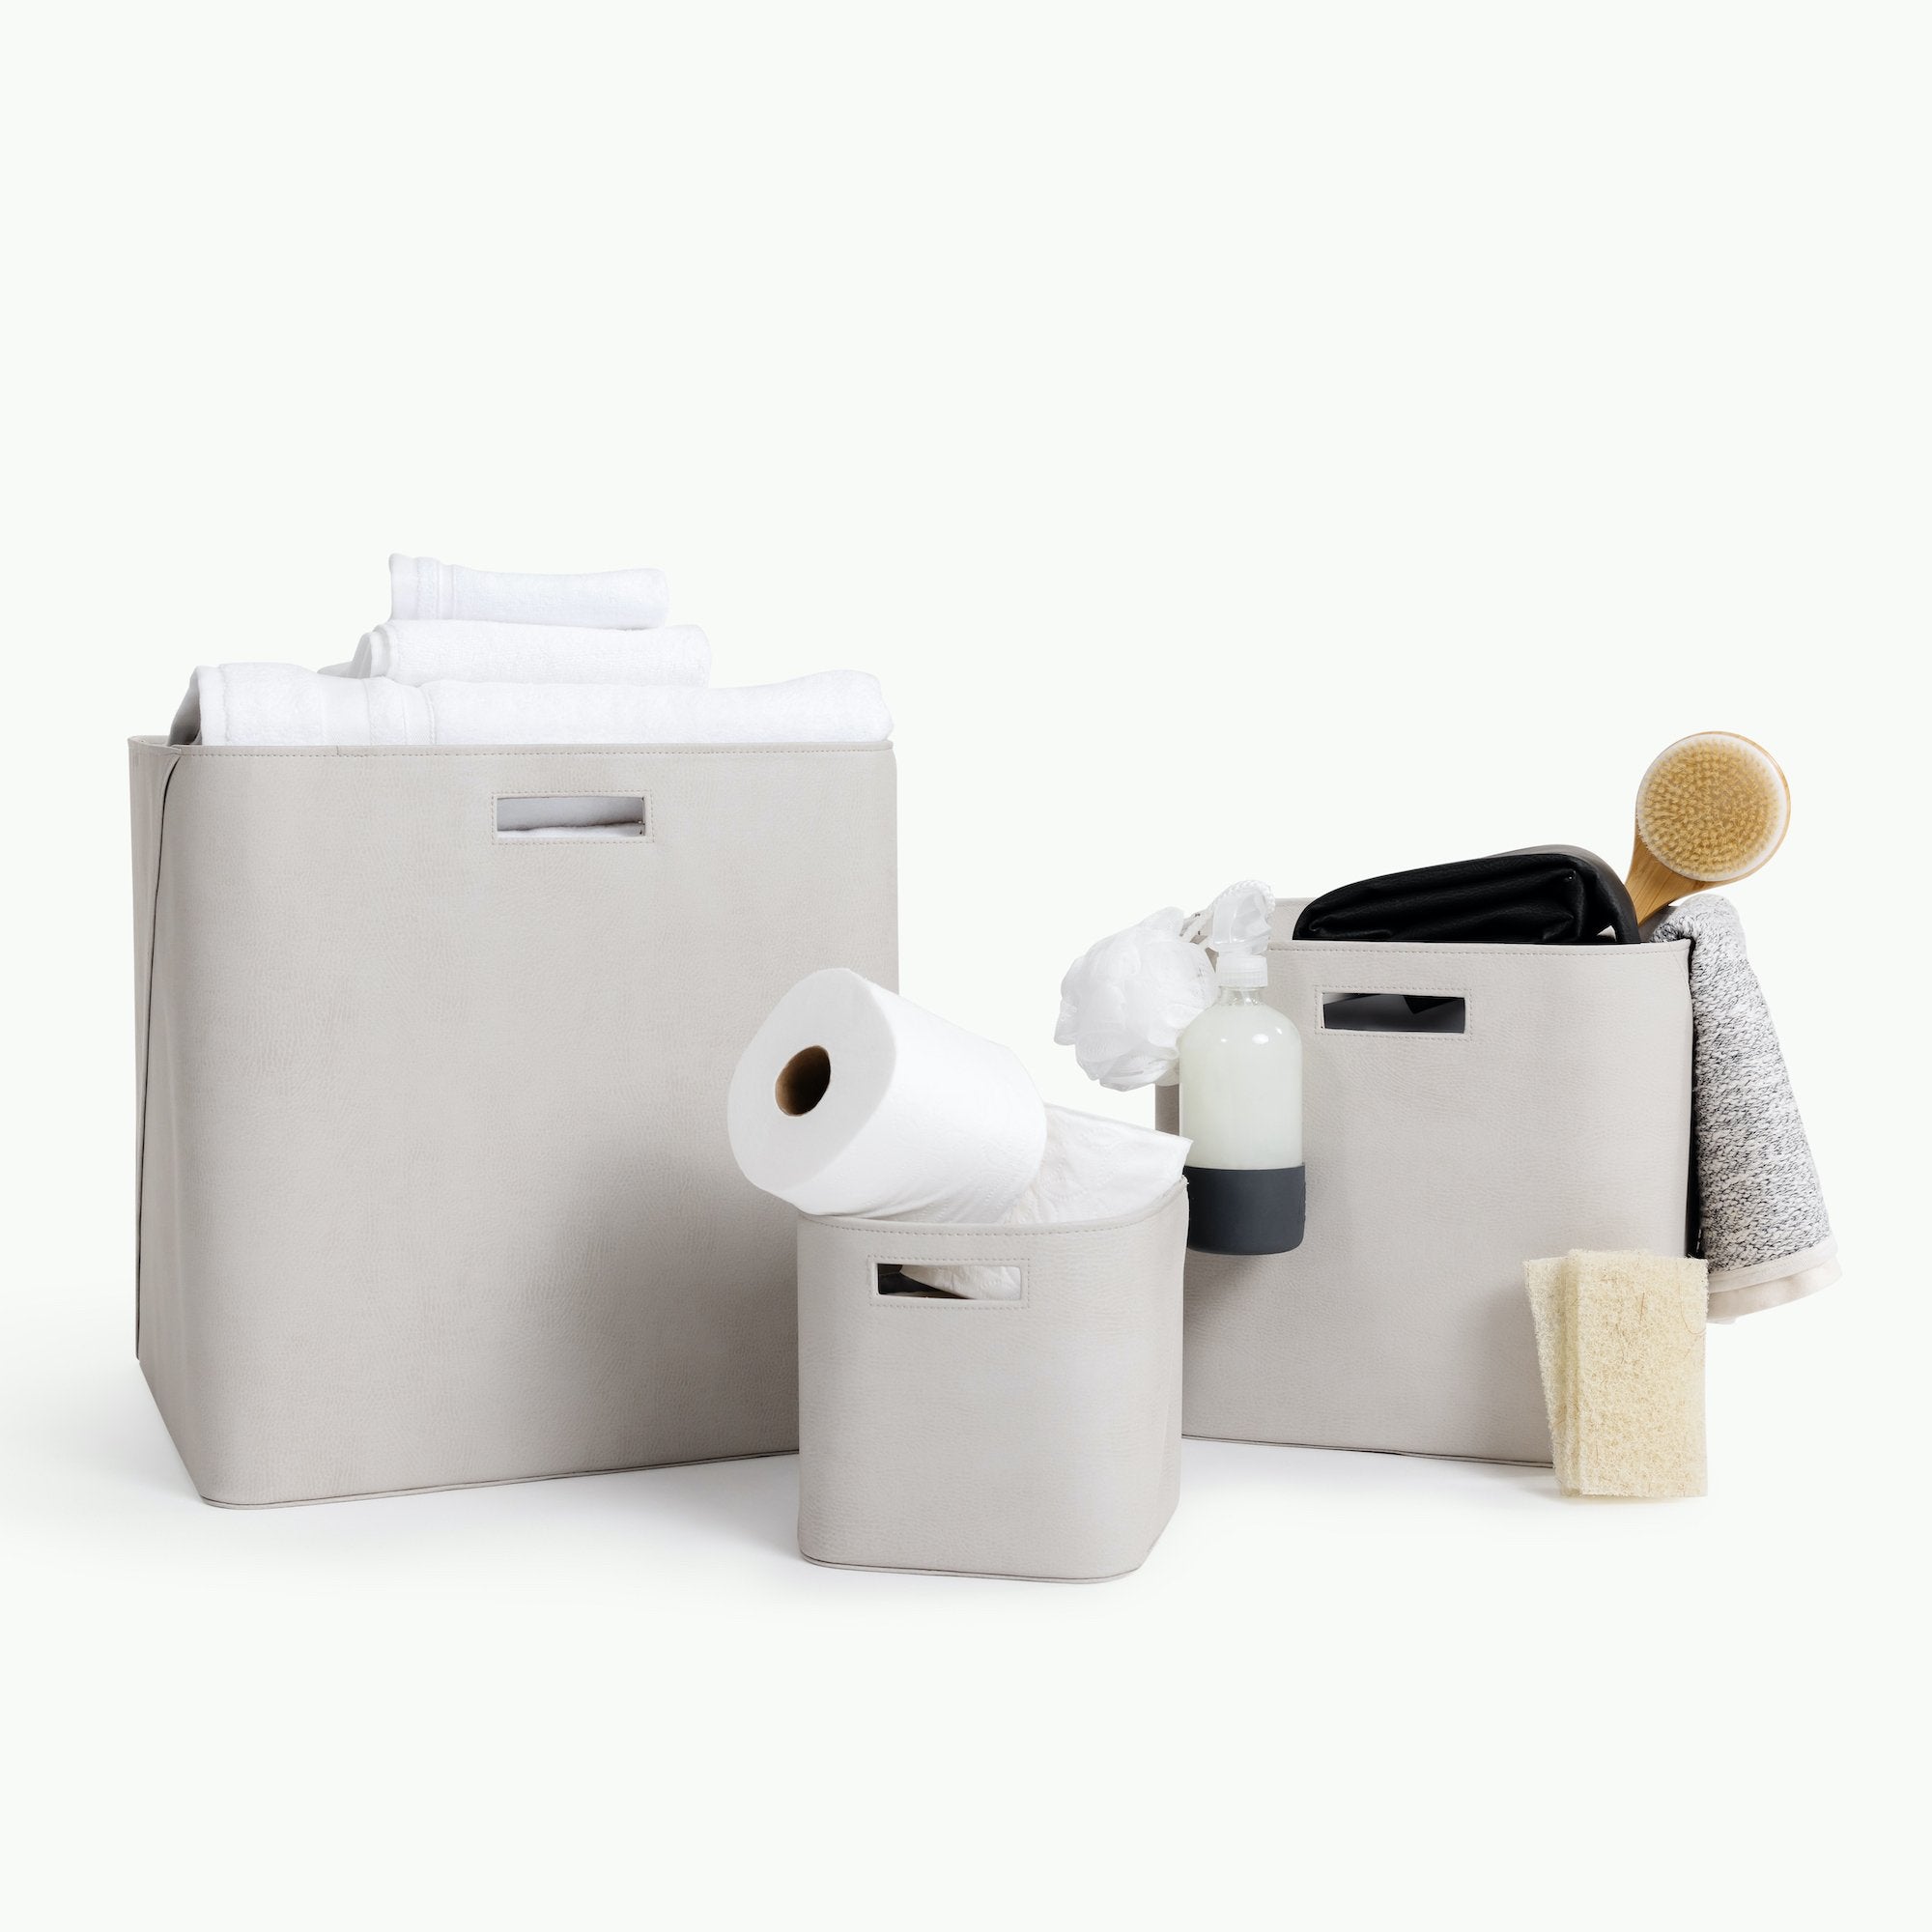 Gull@Gull Storage Bins full of cleaning supplies + linens